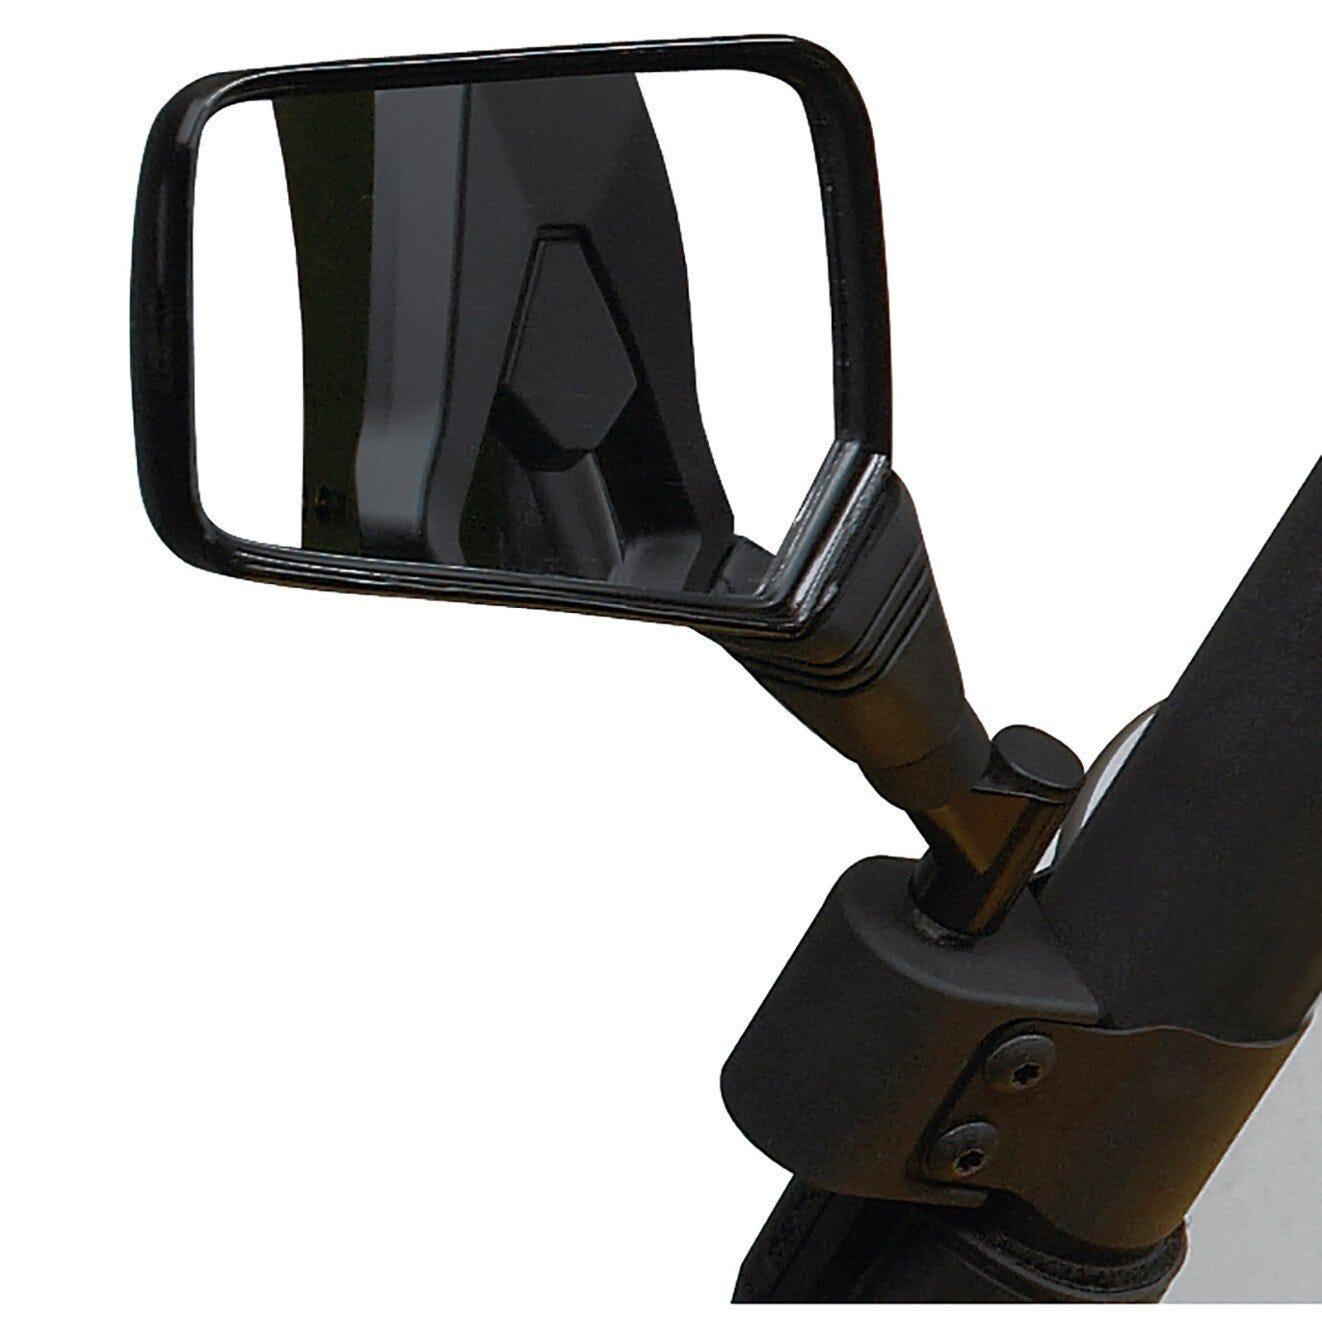 Shop Can-Am SXS MIrrors at Factory Recreation | Factory Recreation